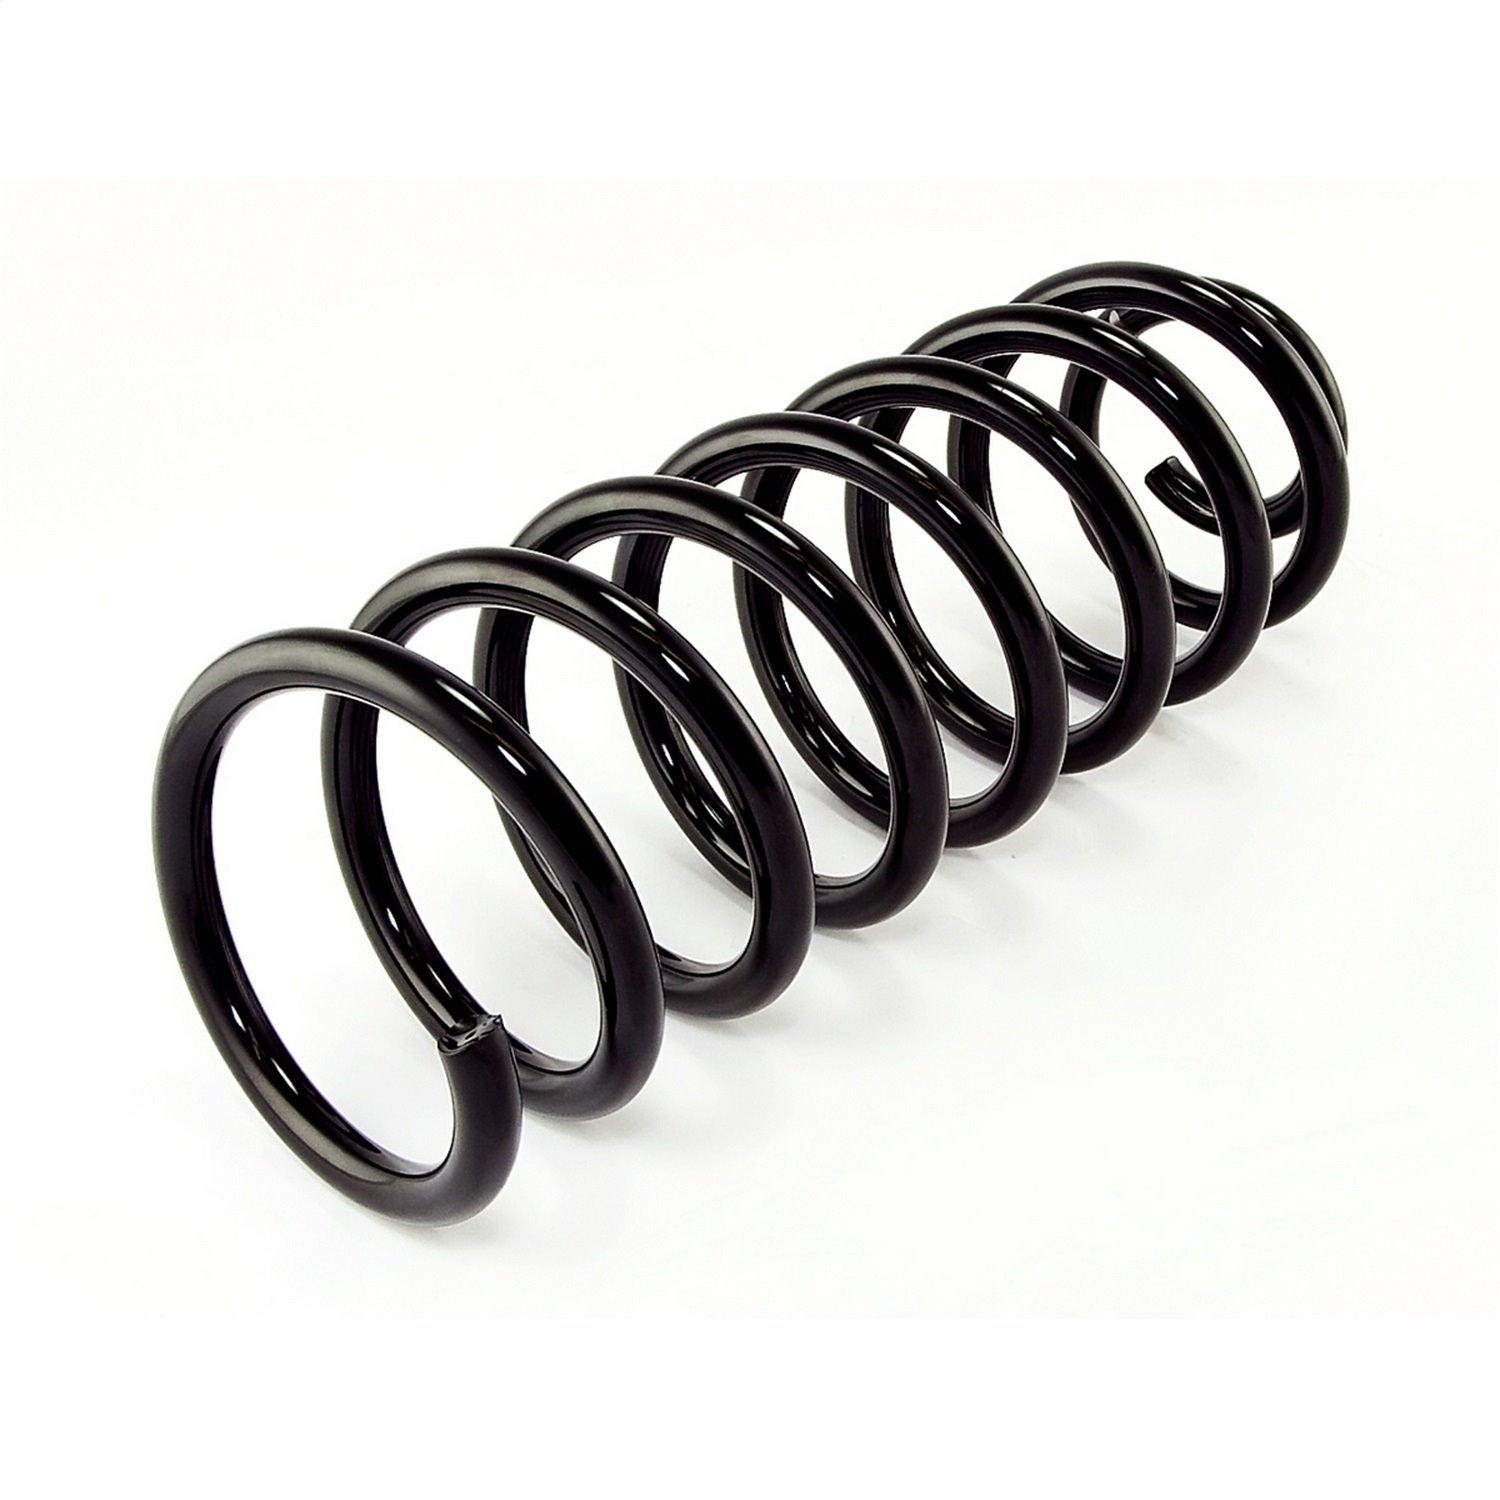 This stock rear coil spring from Omix-ADA fits 93-98 Jeep Grand Cherokee ZJ .